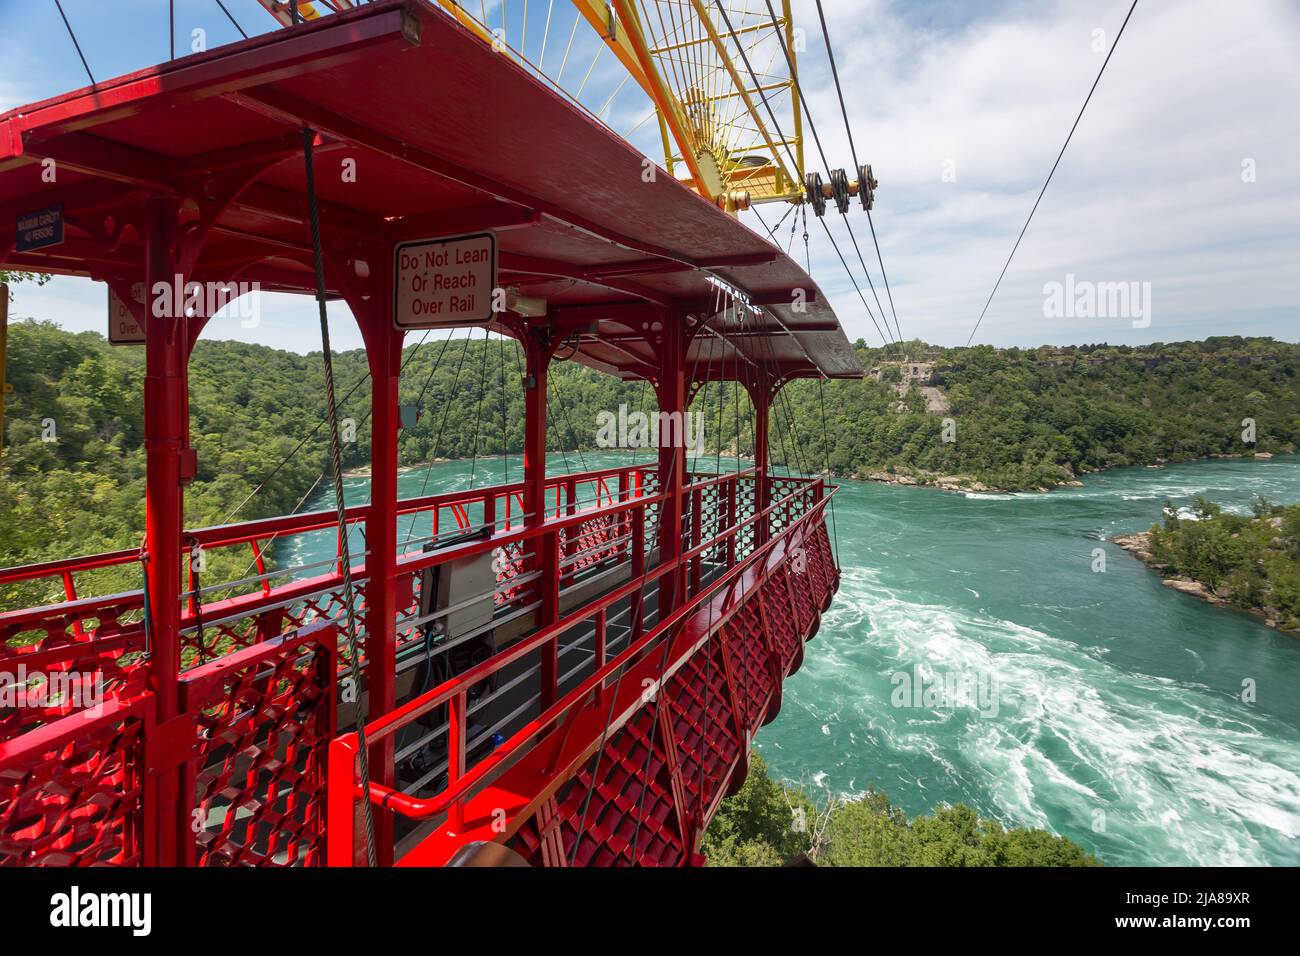 The Whirlpool Aero Car ready for a ride over the whirlpool of the Niagara River. Niagara Falls, Ontario, Canada Stock Photo